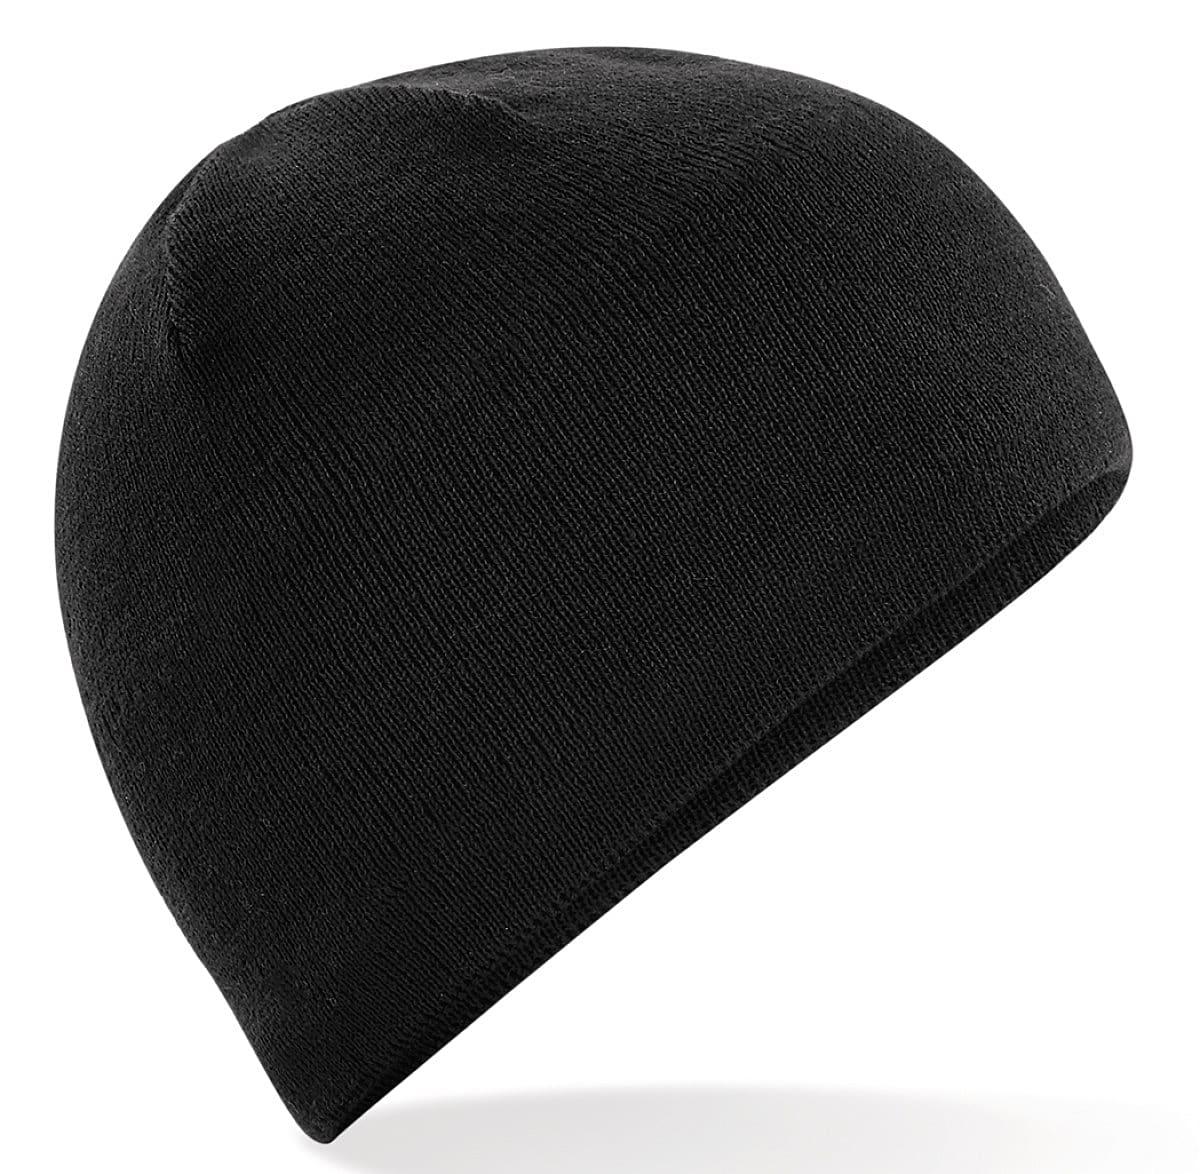 Beechfield Active Performance Beanie Hat in Black (Product Code: B444)